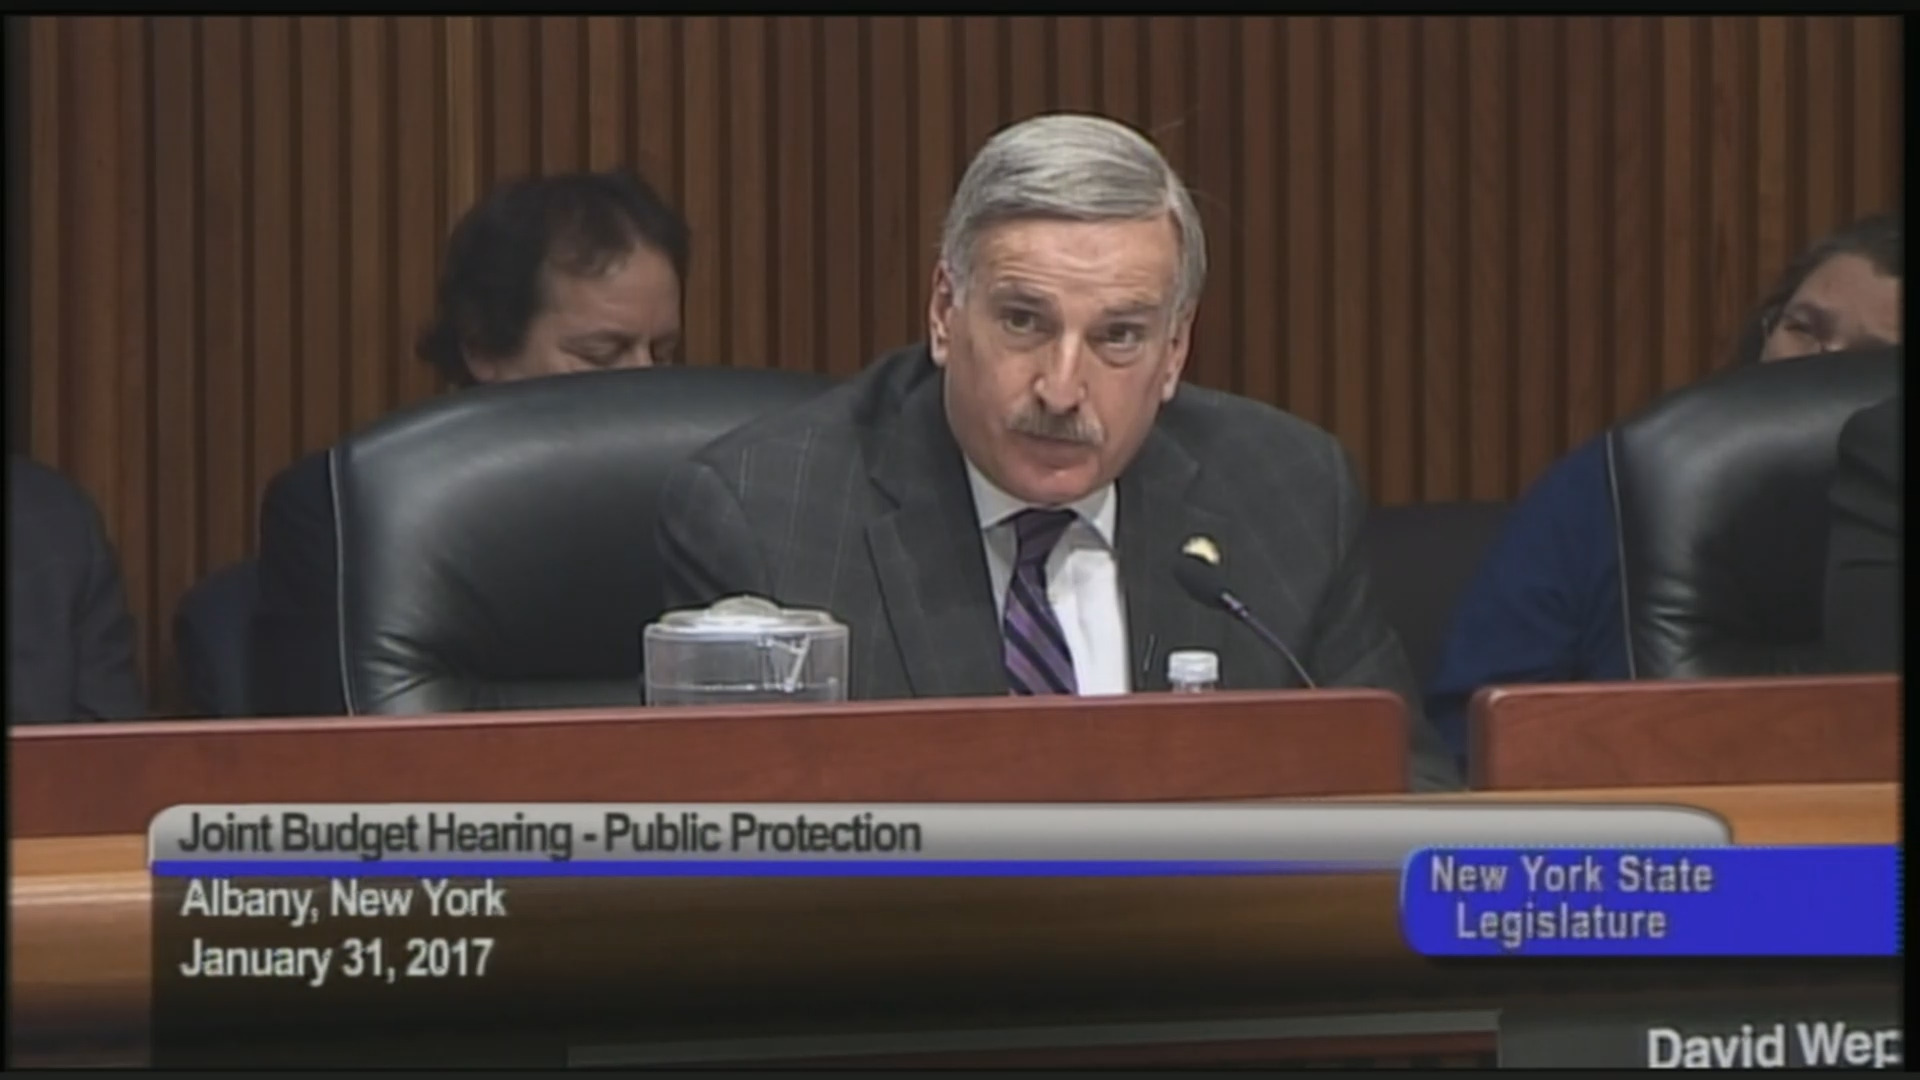 Public Protection Budget Hearing